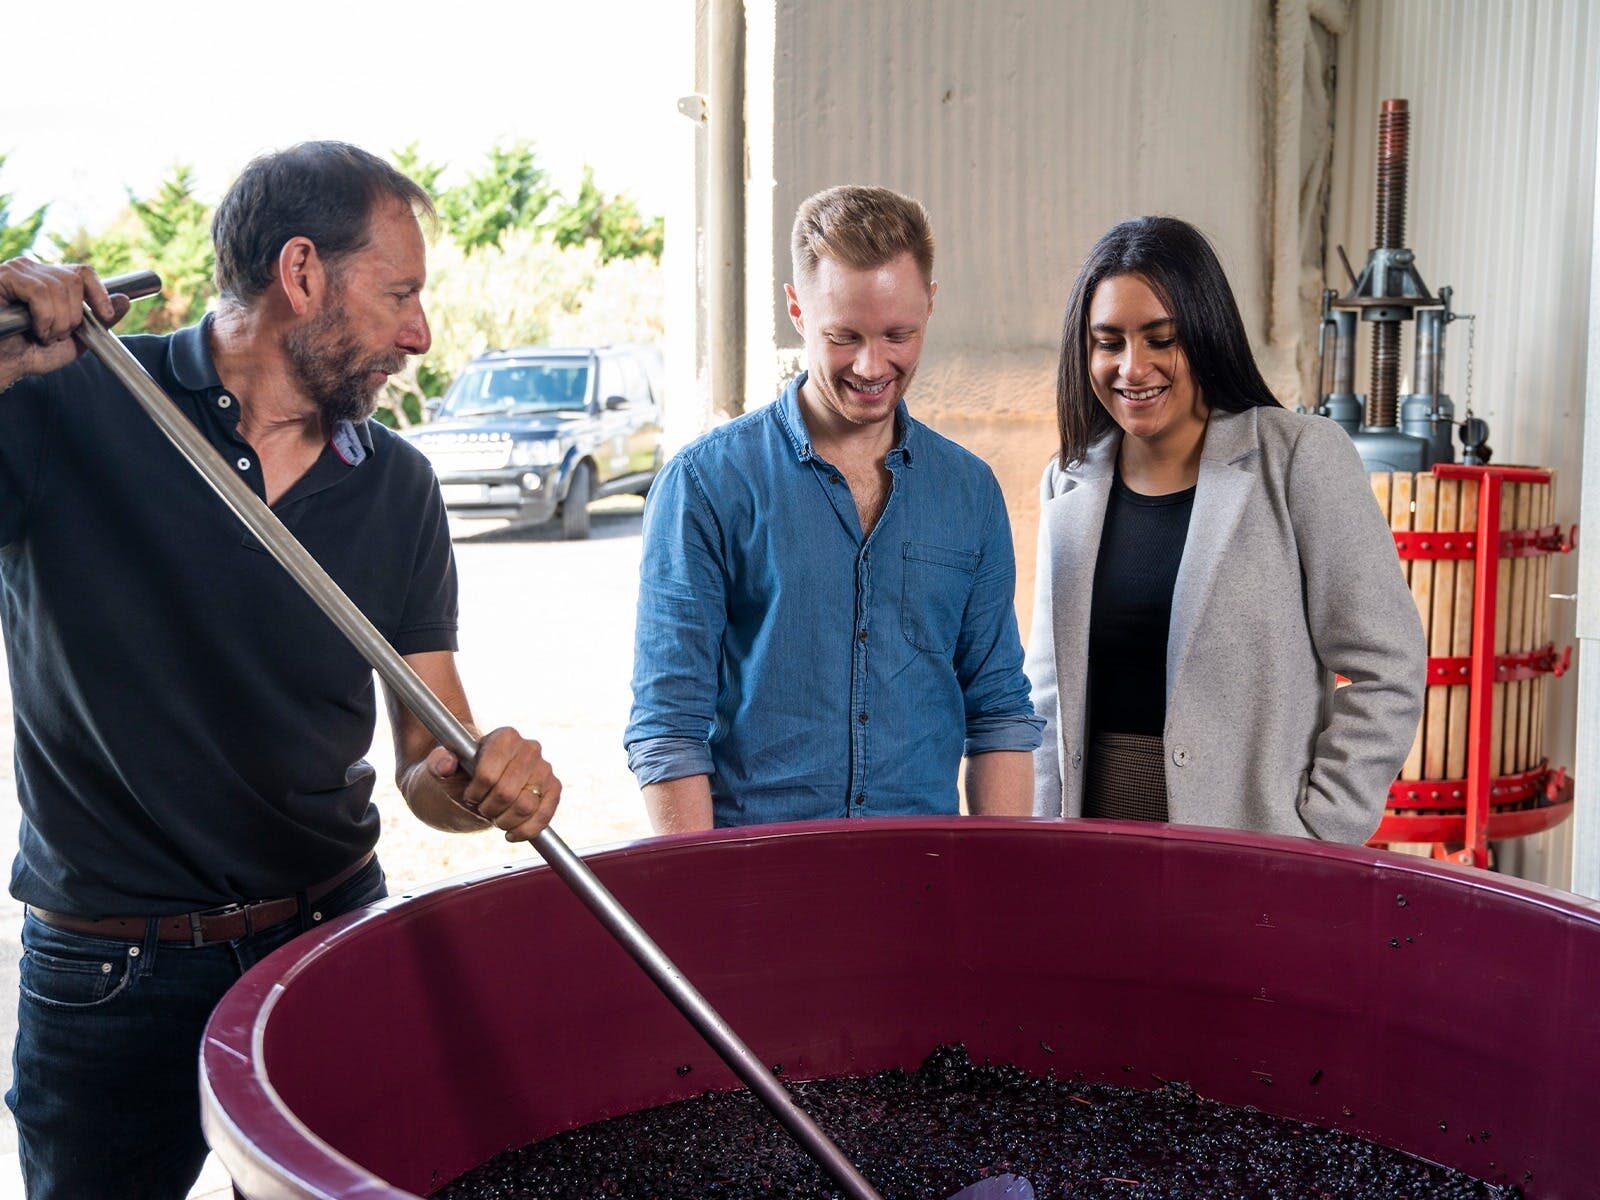 A couple in a Canberra winery looking at fermenting red grapes